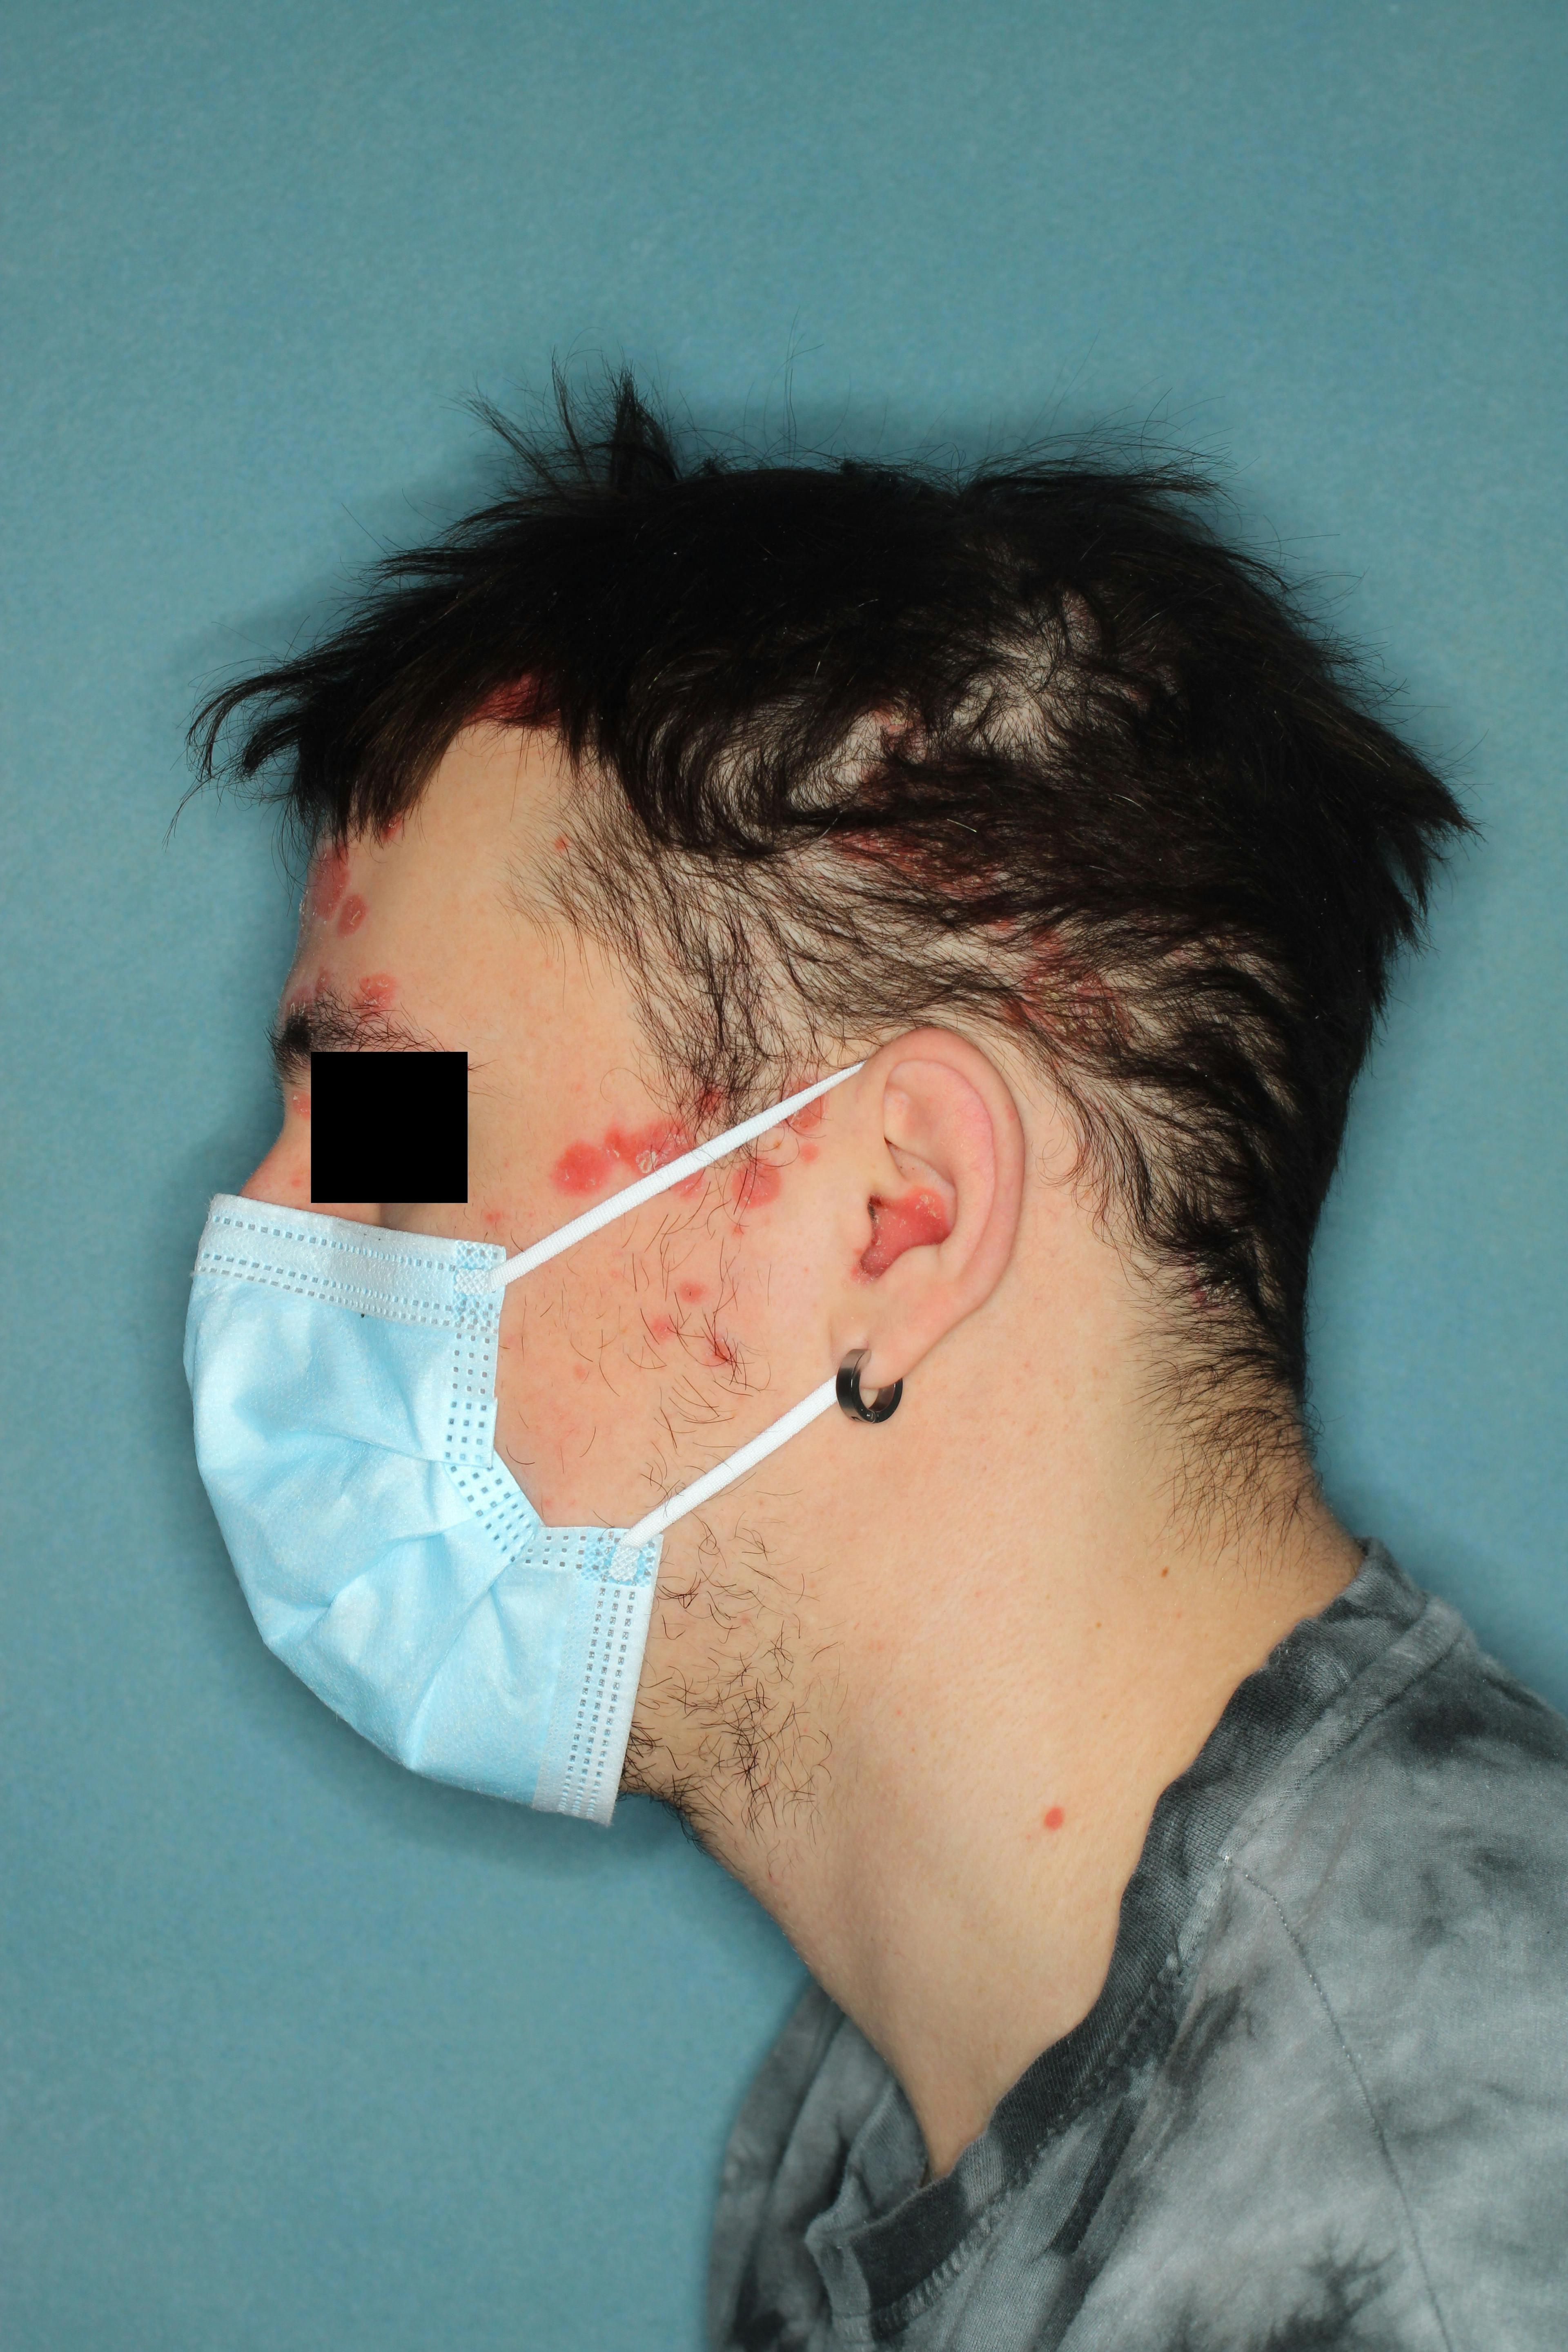 Patient with scalp psoriasis before treatment with guselkumab

Image courtesy of Johnson & Johnson 